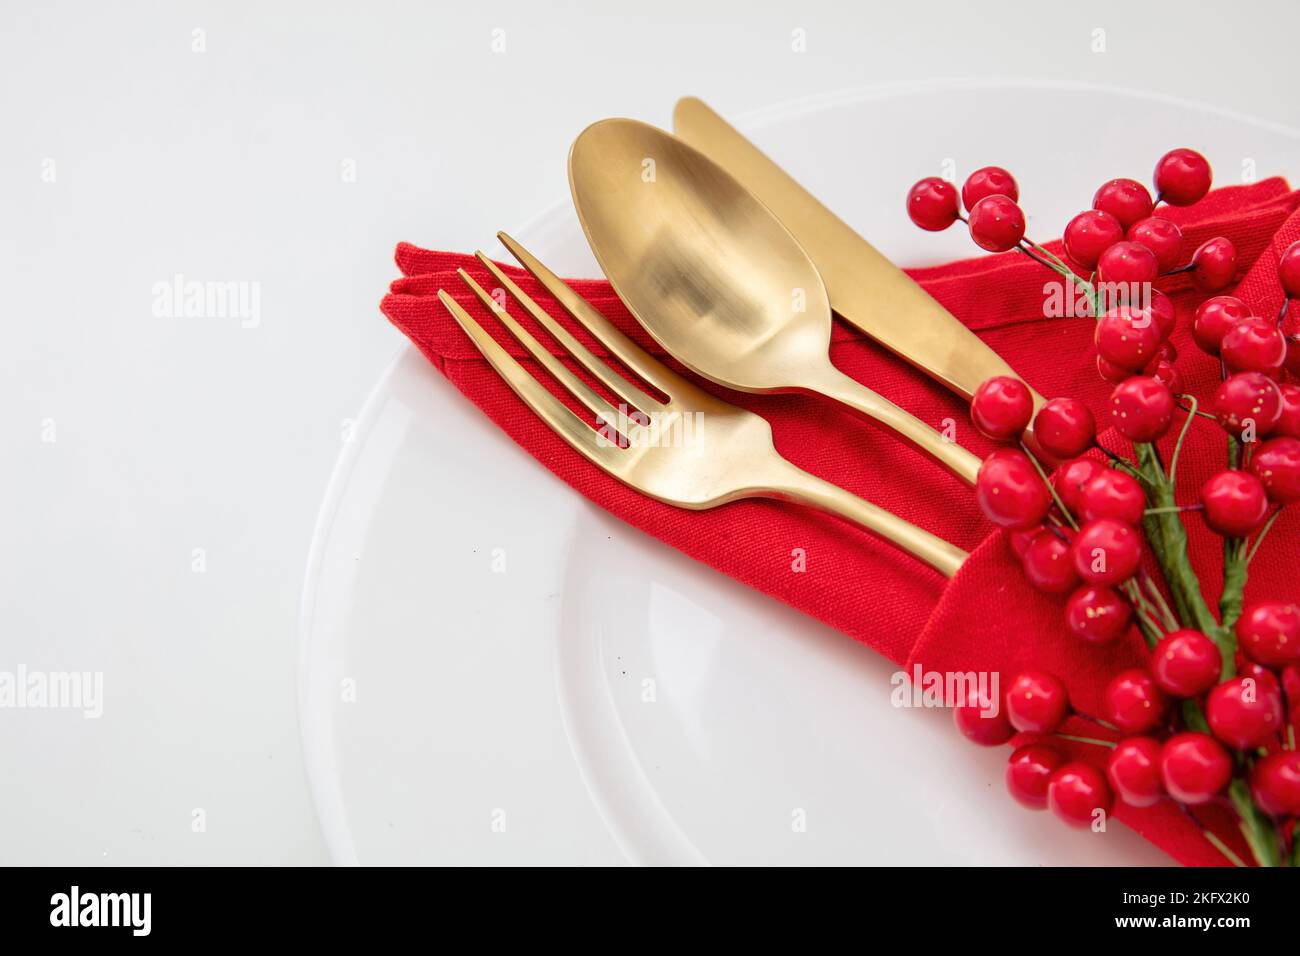 Holiday table setting. Golden Cutlery and red cloth napkin on white plate, close up view. Christmas New Year celebration dinner Stock Photo